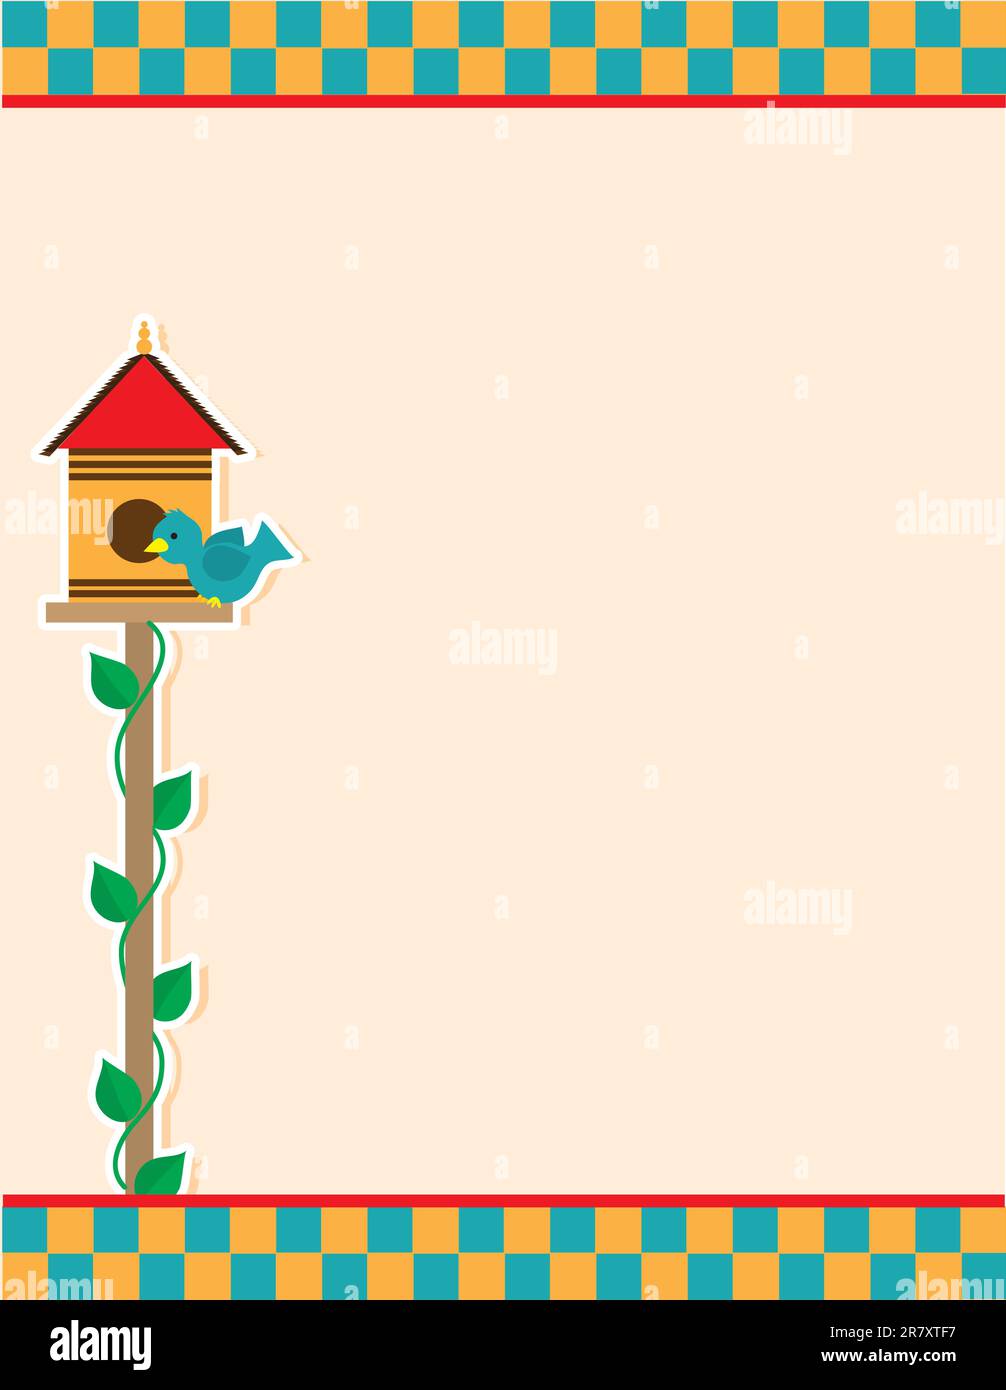 A background of a birdhouse and blue colored bird, atop a vine covered pole; includes a checkered header and footer. Stock Vector